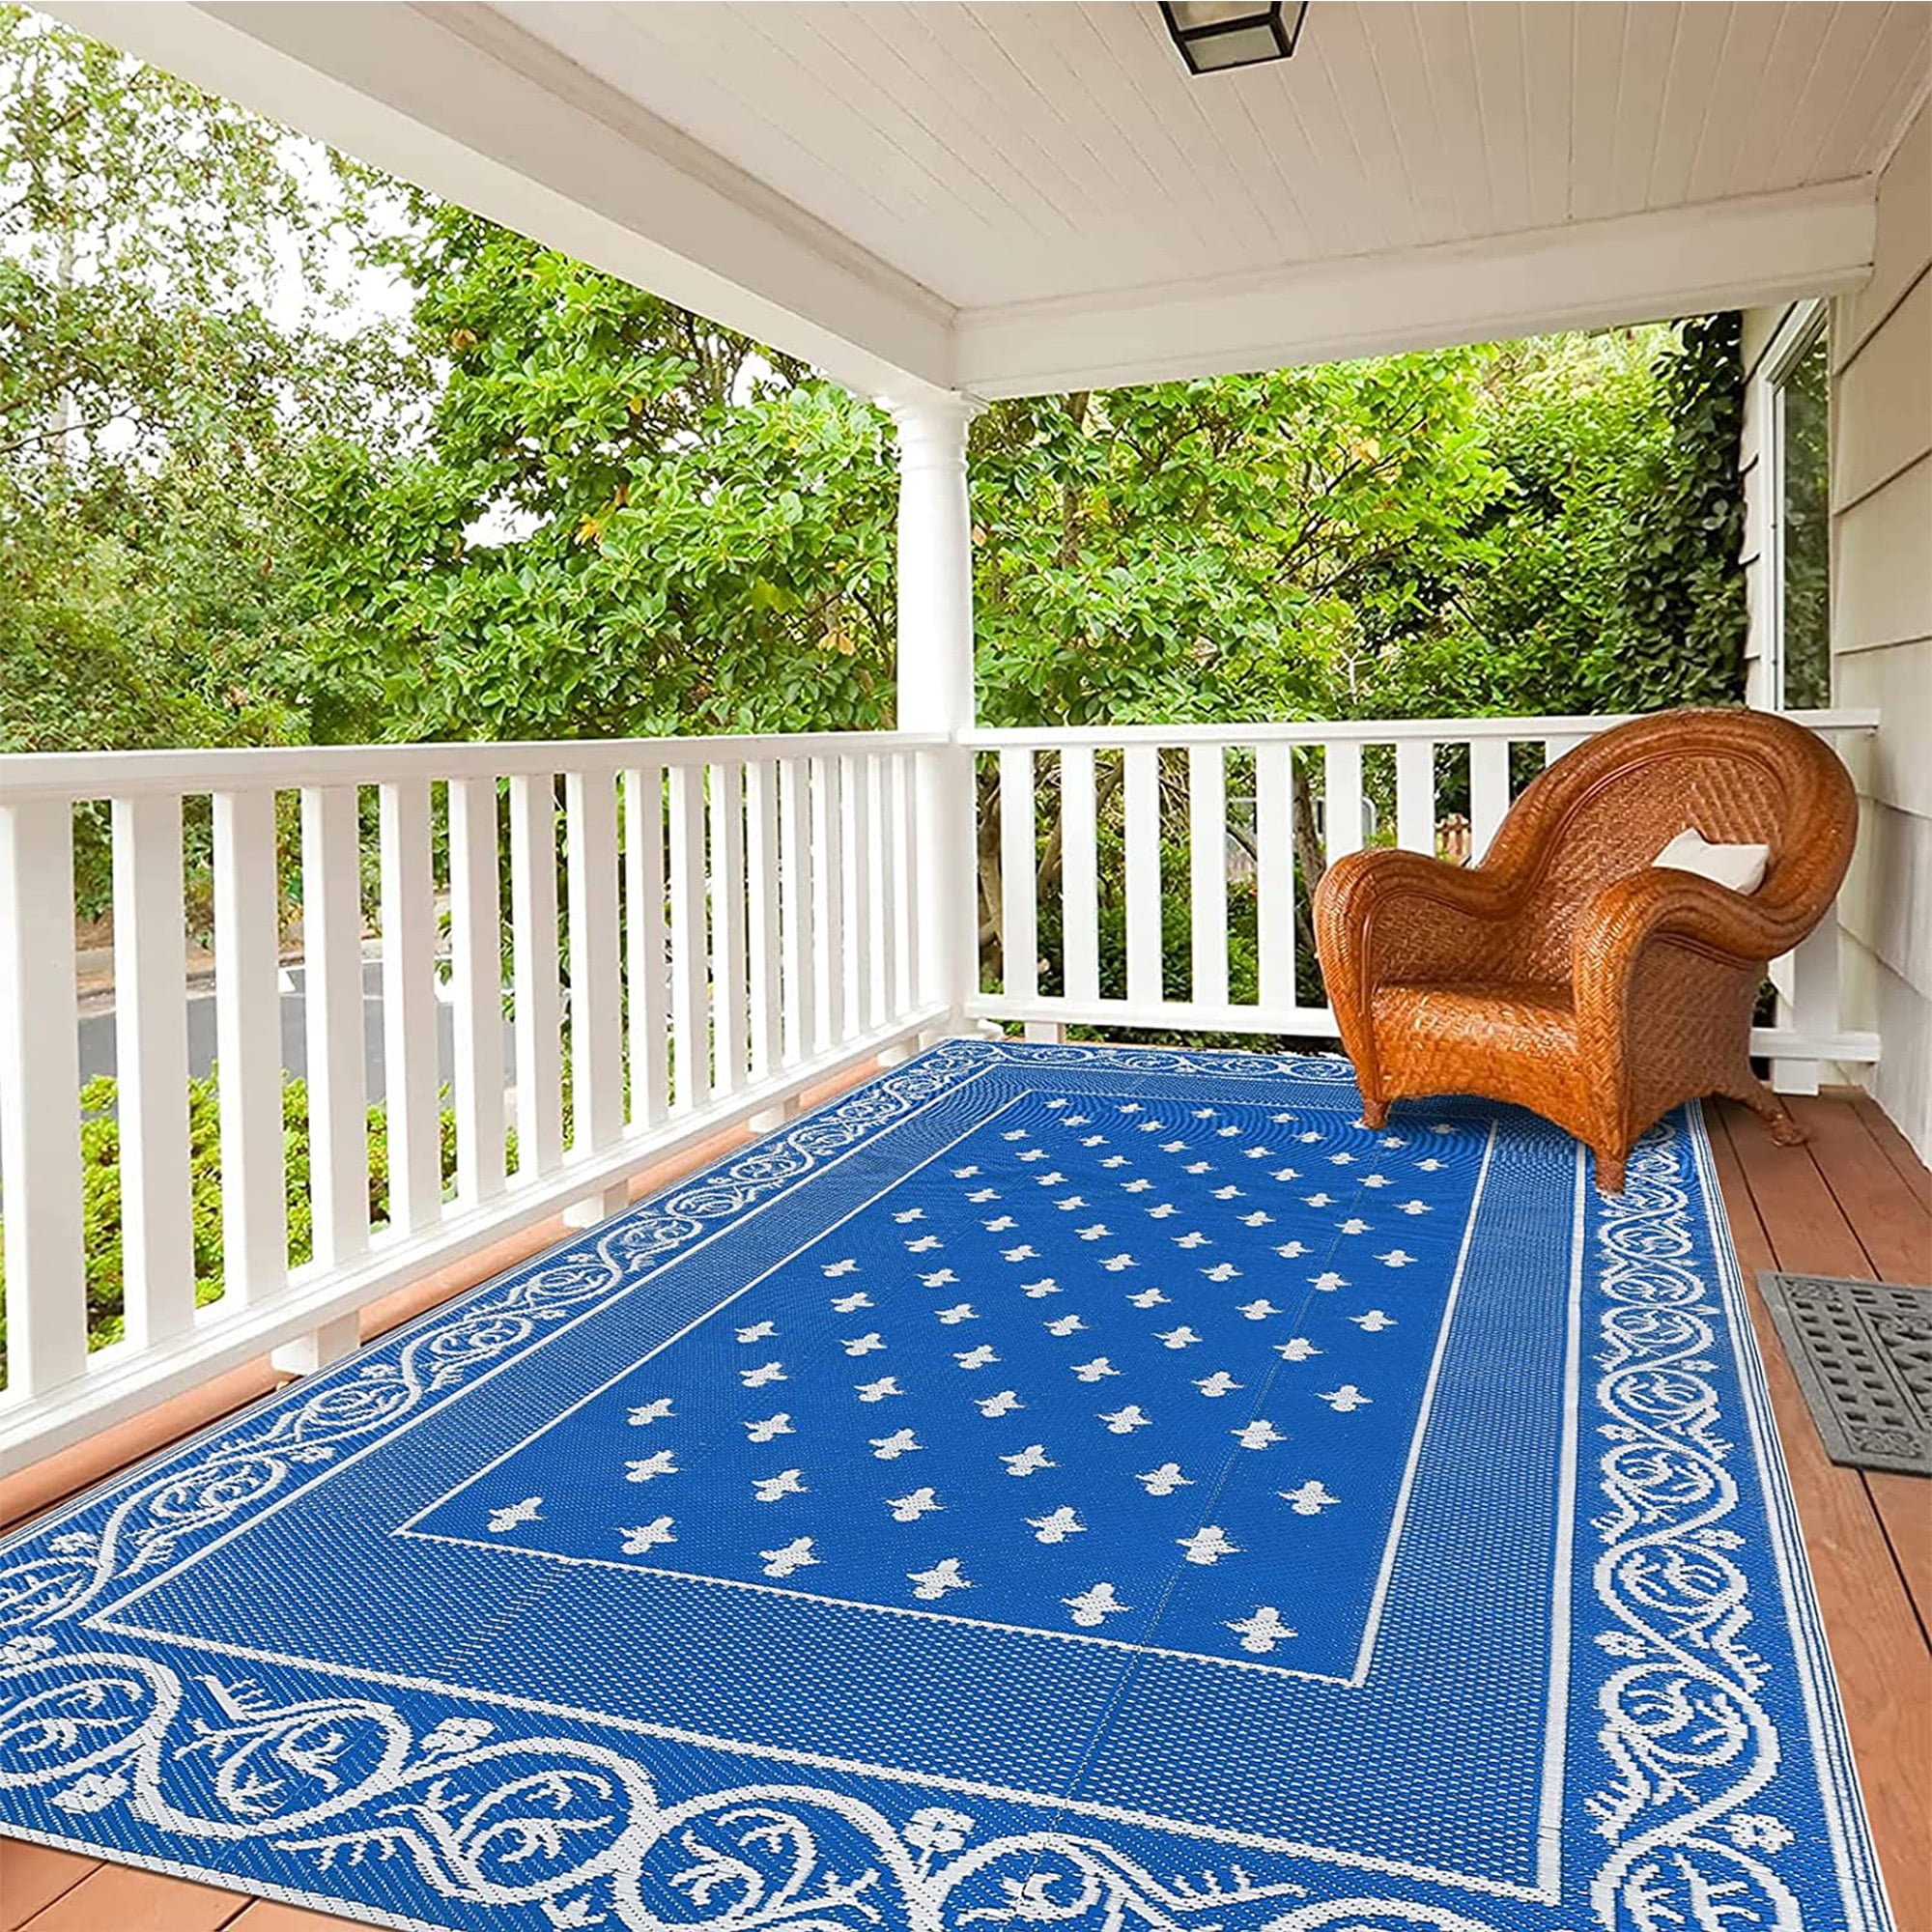 wikiwiki Reversible Rugs Mats, 9x12ft Waterproof Outdoor Patio Rug,Large  Plastic Straw Floor Mat for Camping, RV, Garden, Balcony, Outside Area